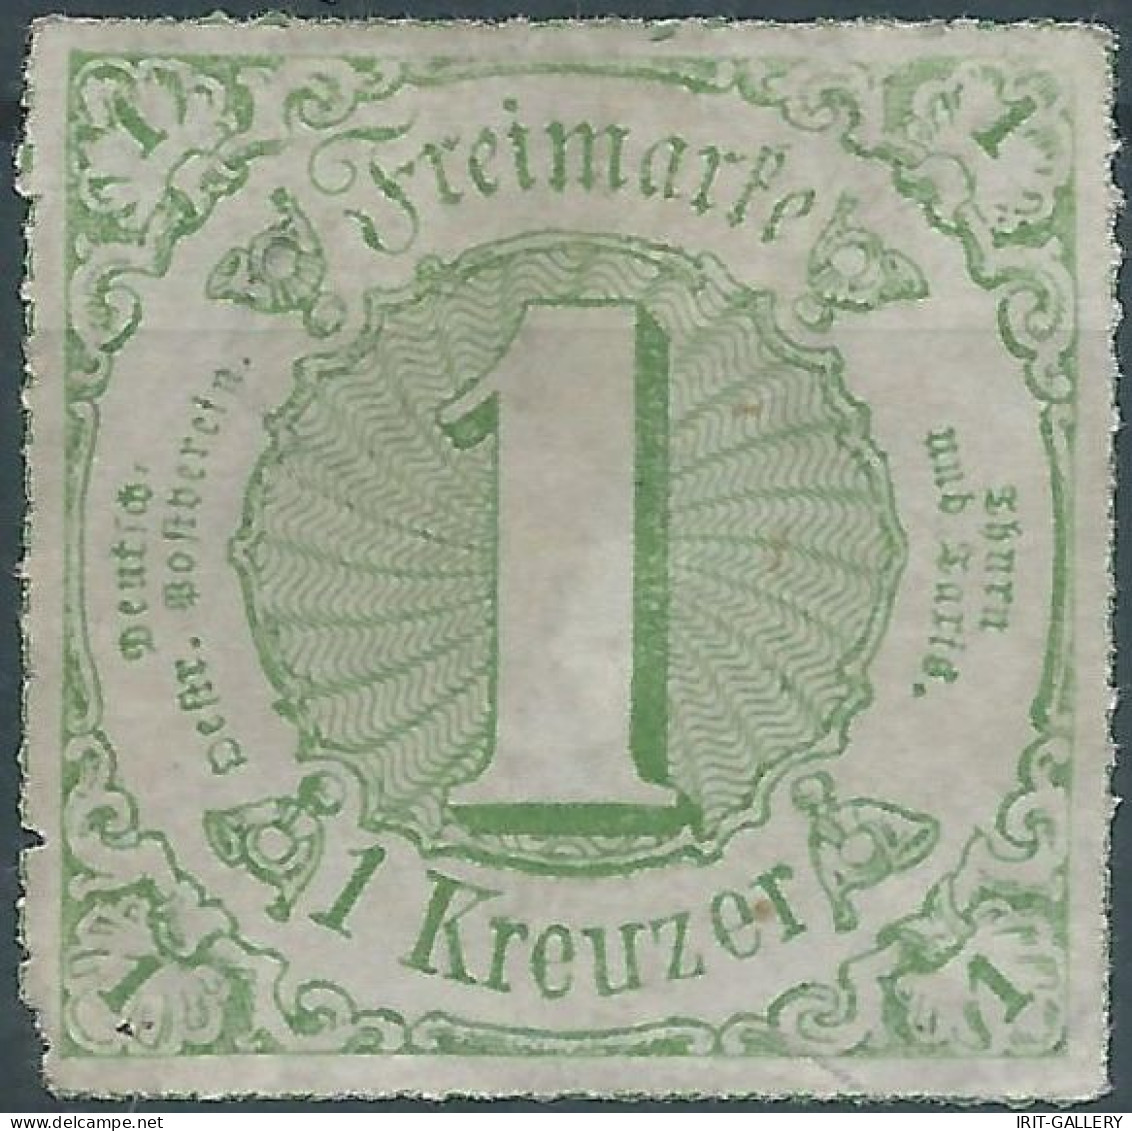 Germania-Germany-Deutschland,Taxis,1865 Colored Print On White Paper-Rouletted Perforation, 1Kr,Mint,Value:€15,00 - Mint